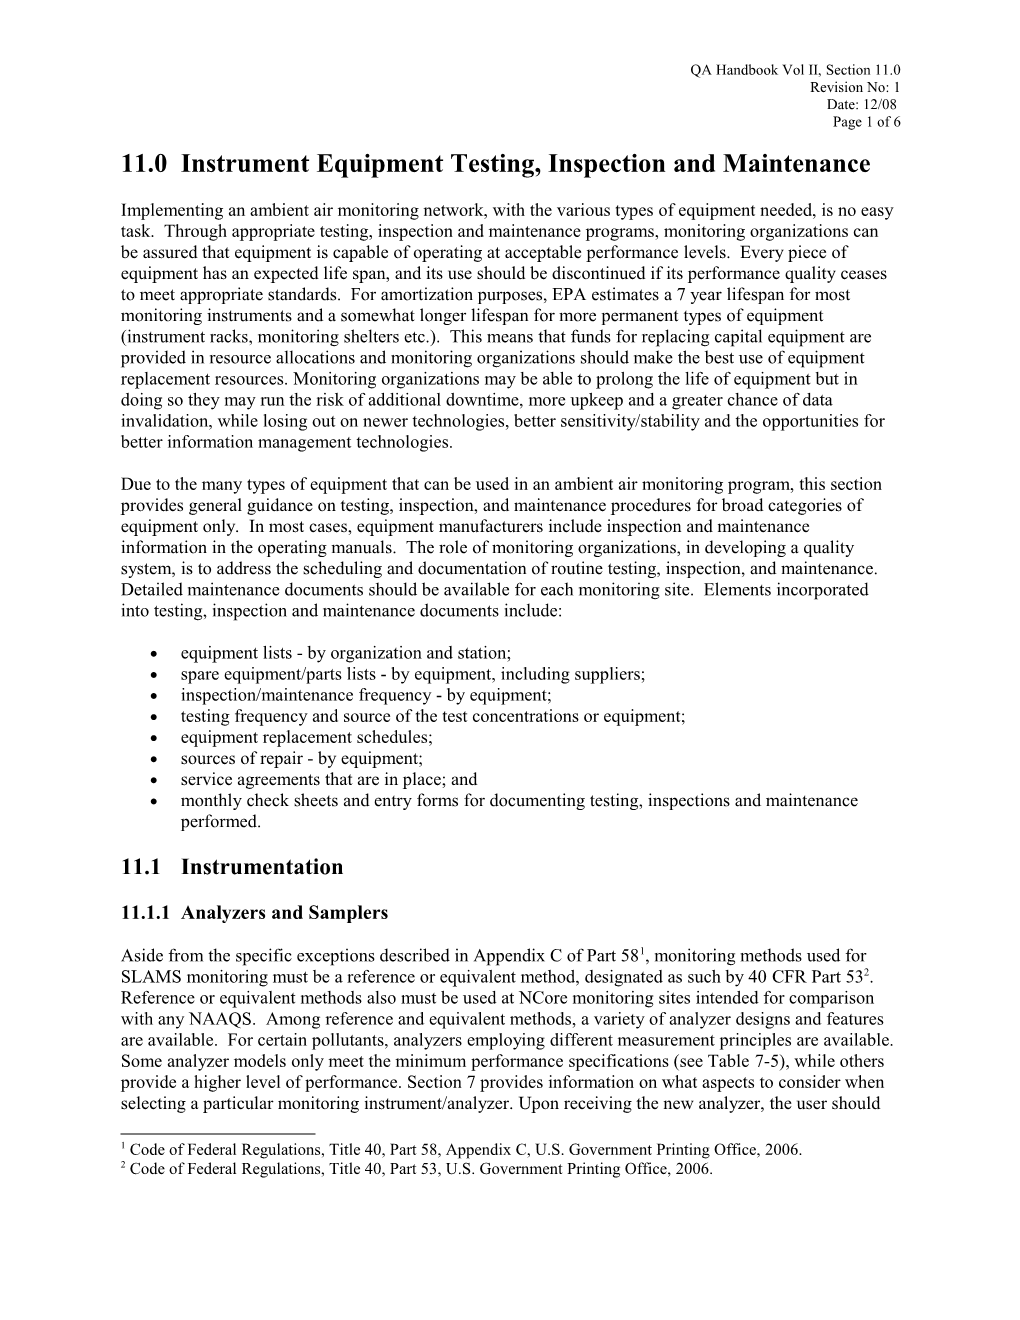 11.0 Instrument Equipment Testing, Inspection and Maintenance